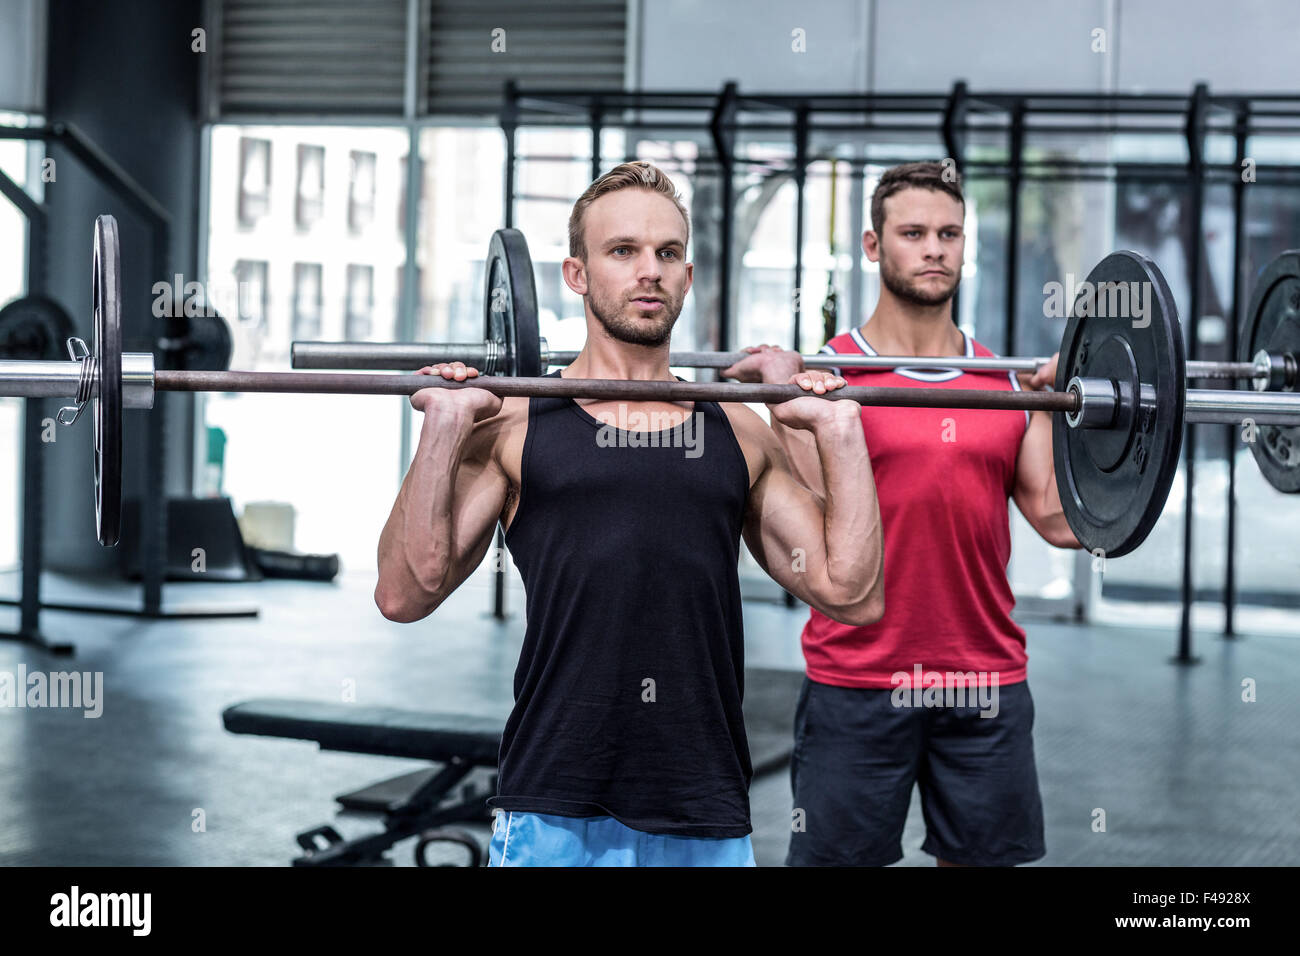 Muscular Men Lifting A Barbell Stock Photo Alamy